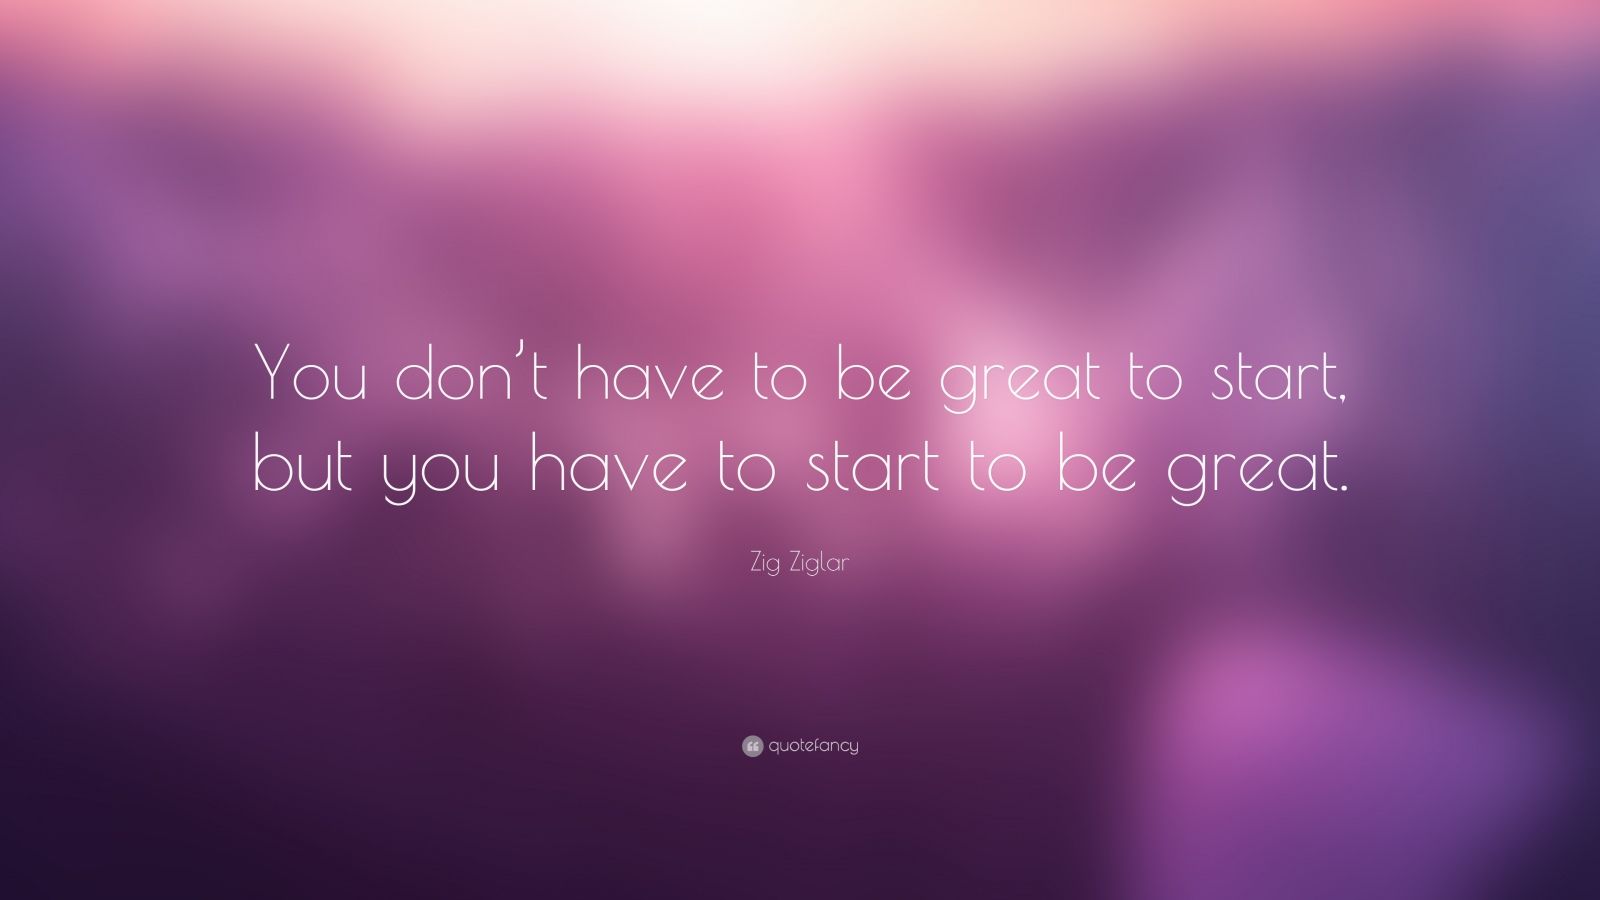 Zig Ziglar Quote: “You don’t have to be great to start, but you have to